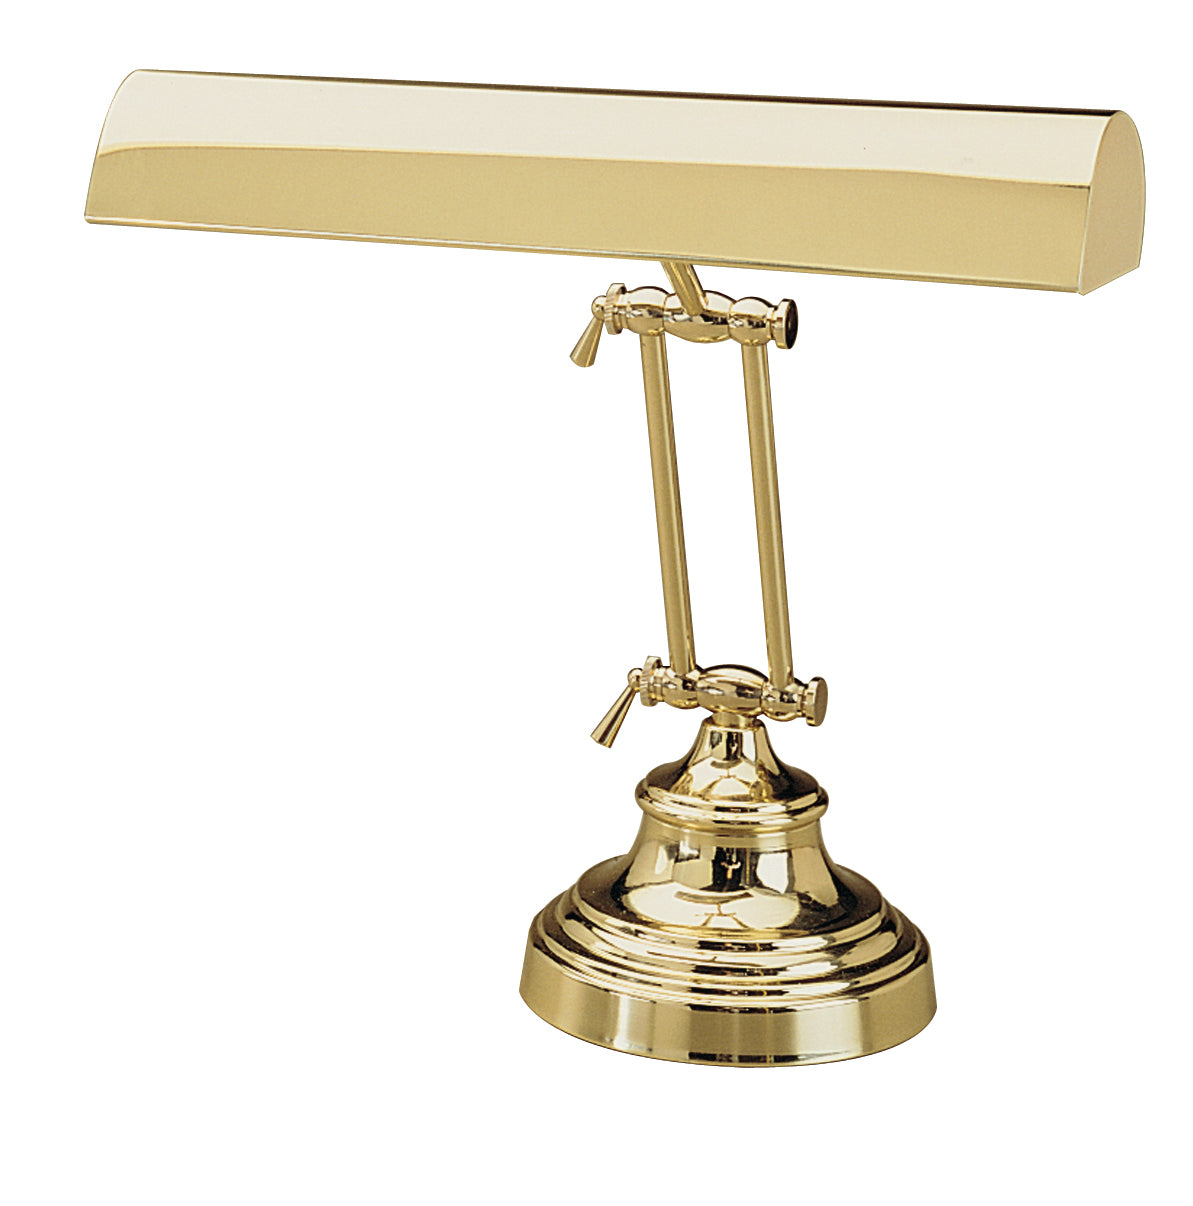 House of Troy Desk Piano Lamp 14" Polished Brass P14-231-61